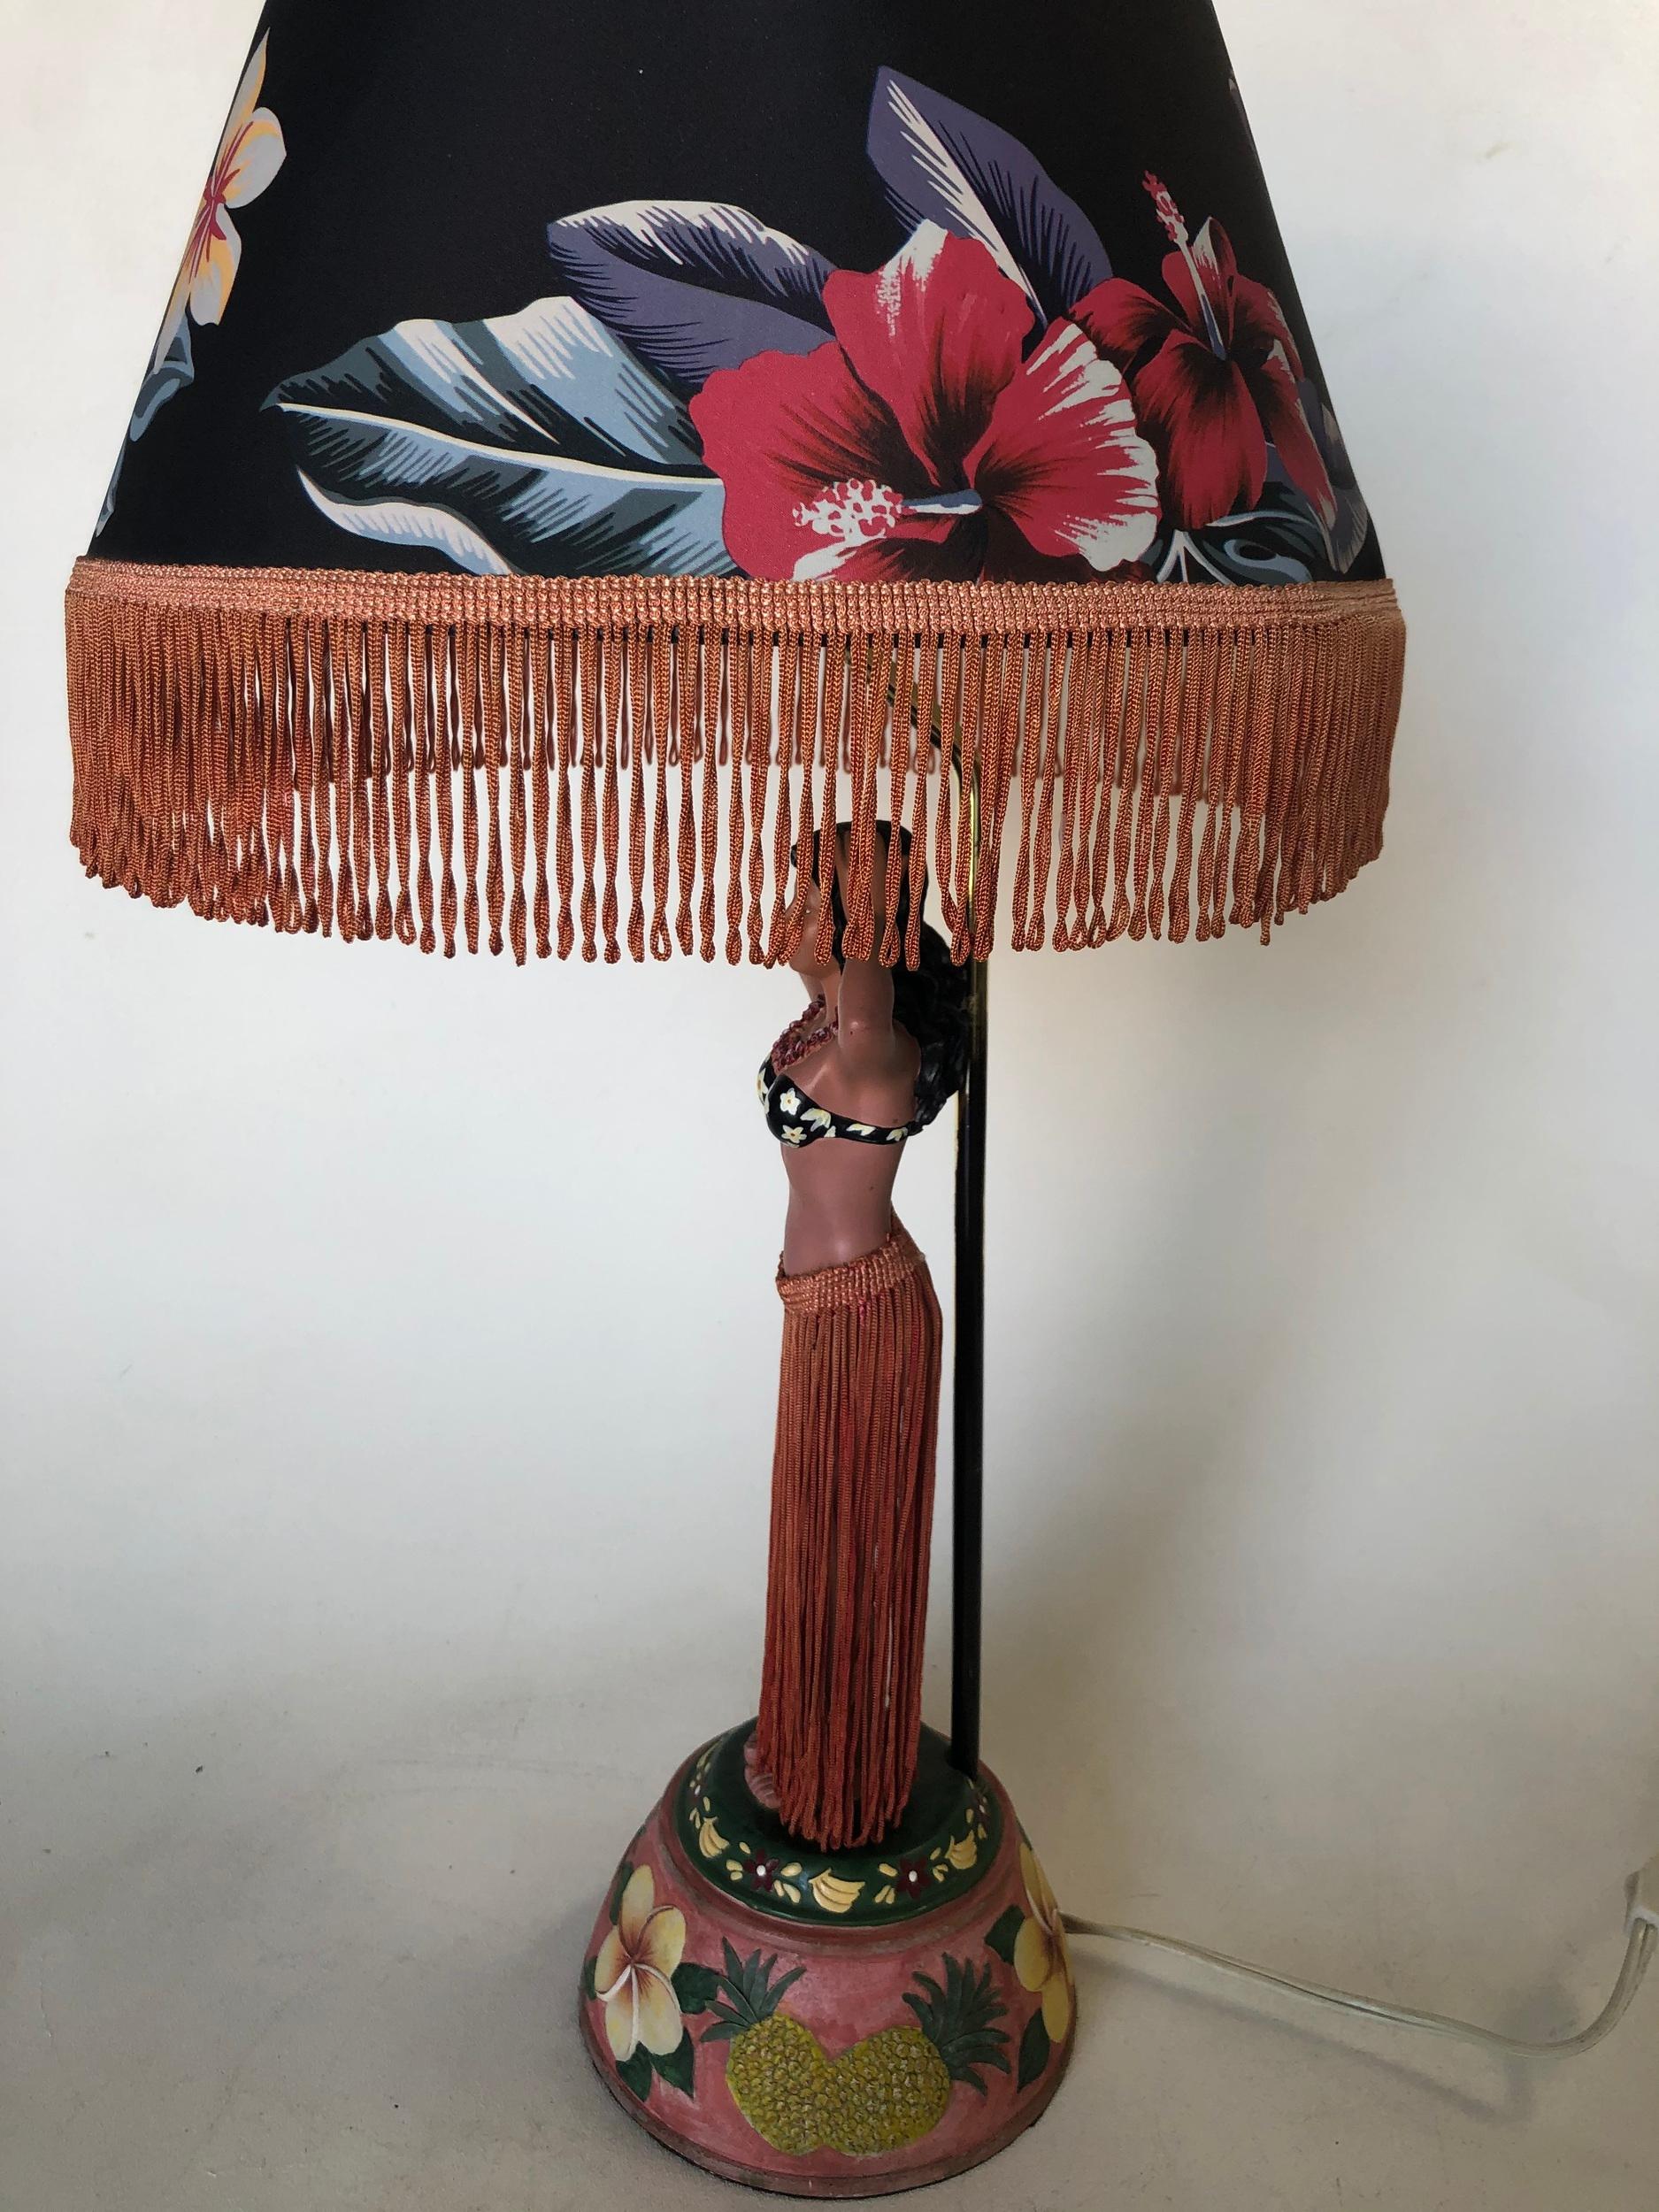 Mid-20th Century Pair of Hula Girl Resin Table Lamp with Floral Fringe Lamp Shades